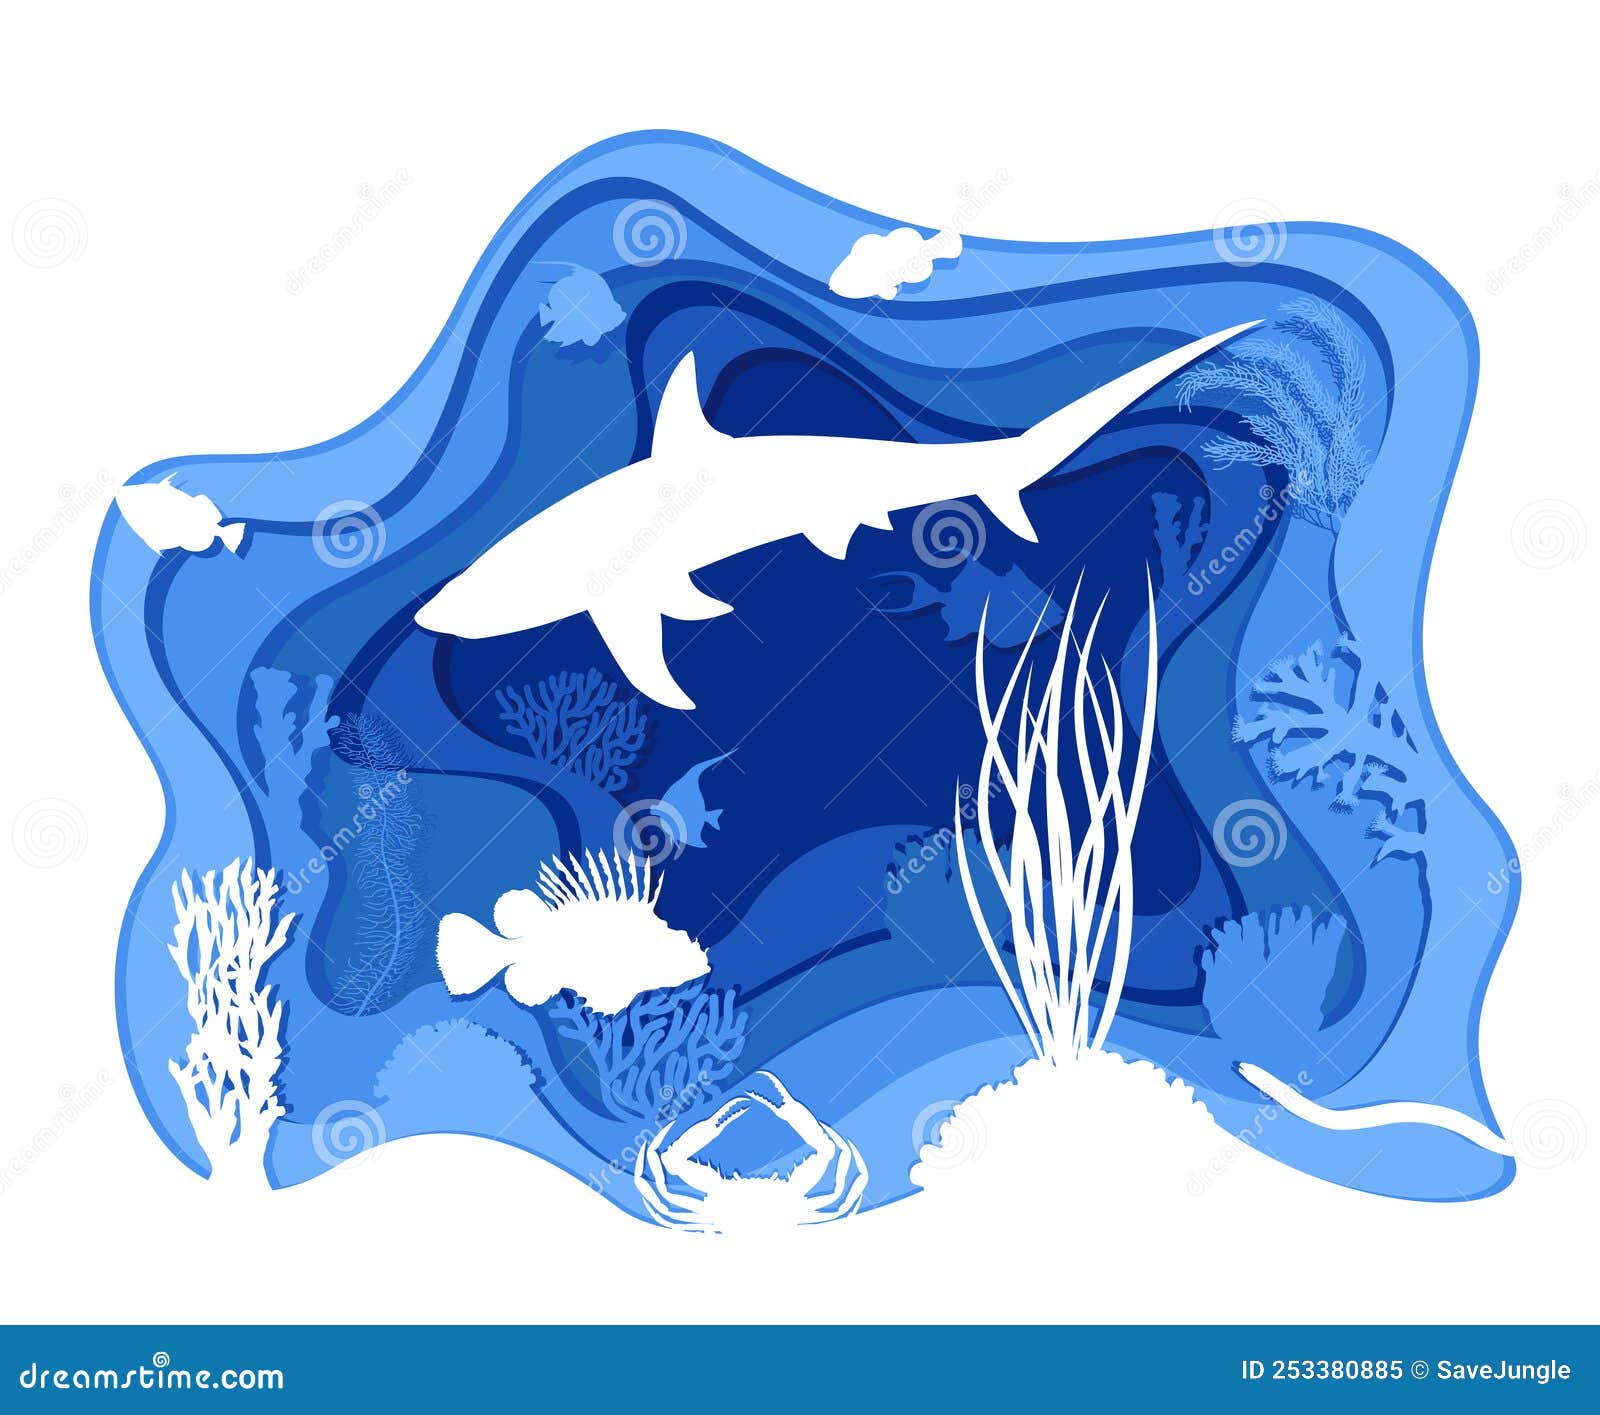 layered paper cut style underwater sea illustratio with shark, pterois, crab and coral reef